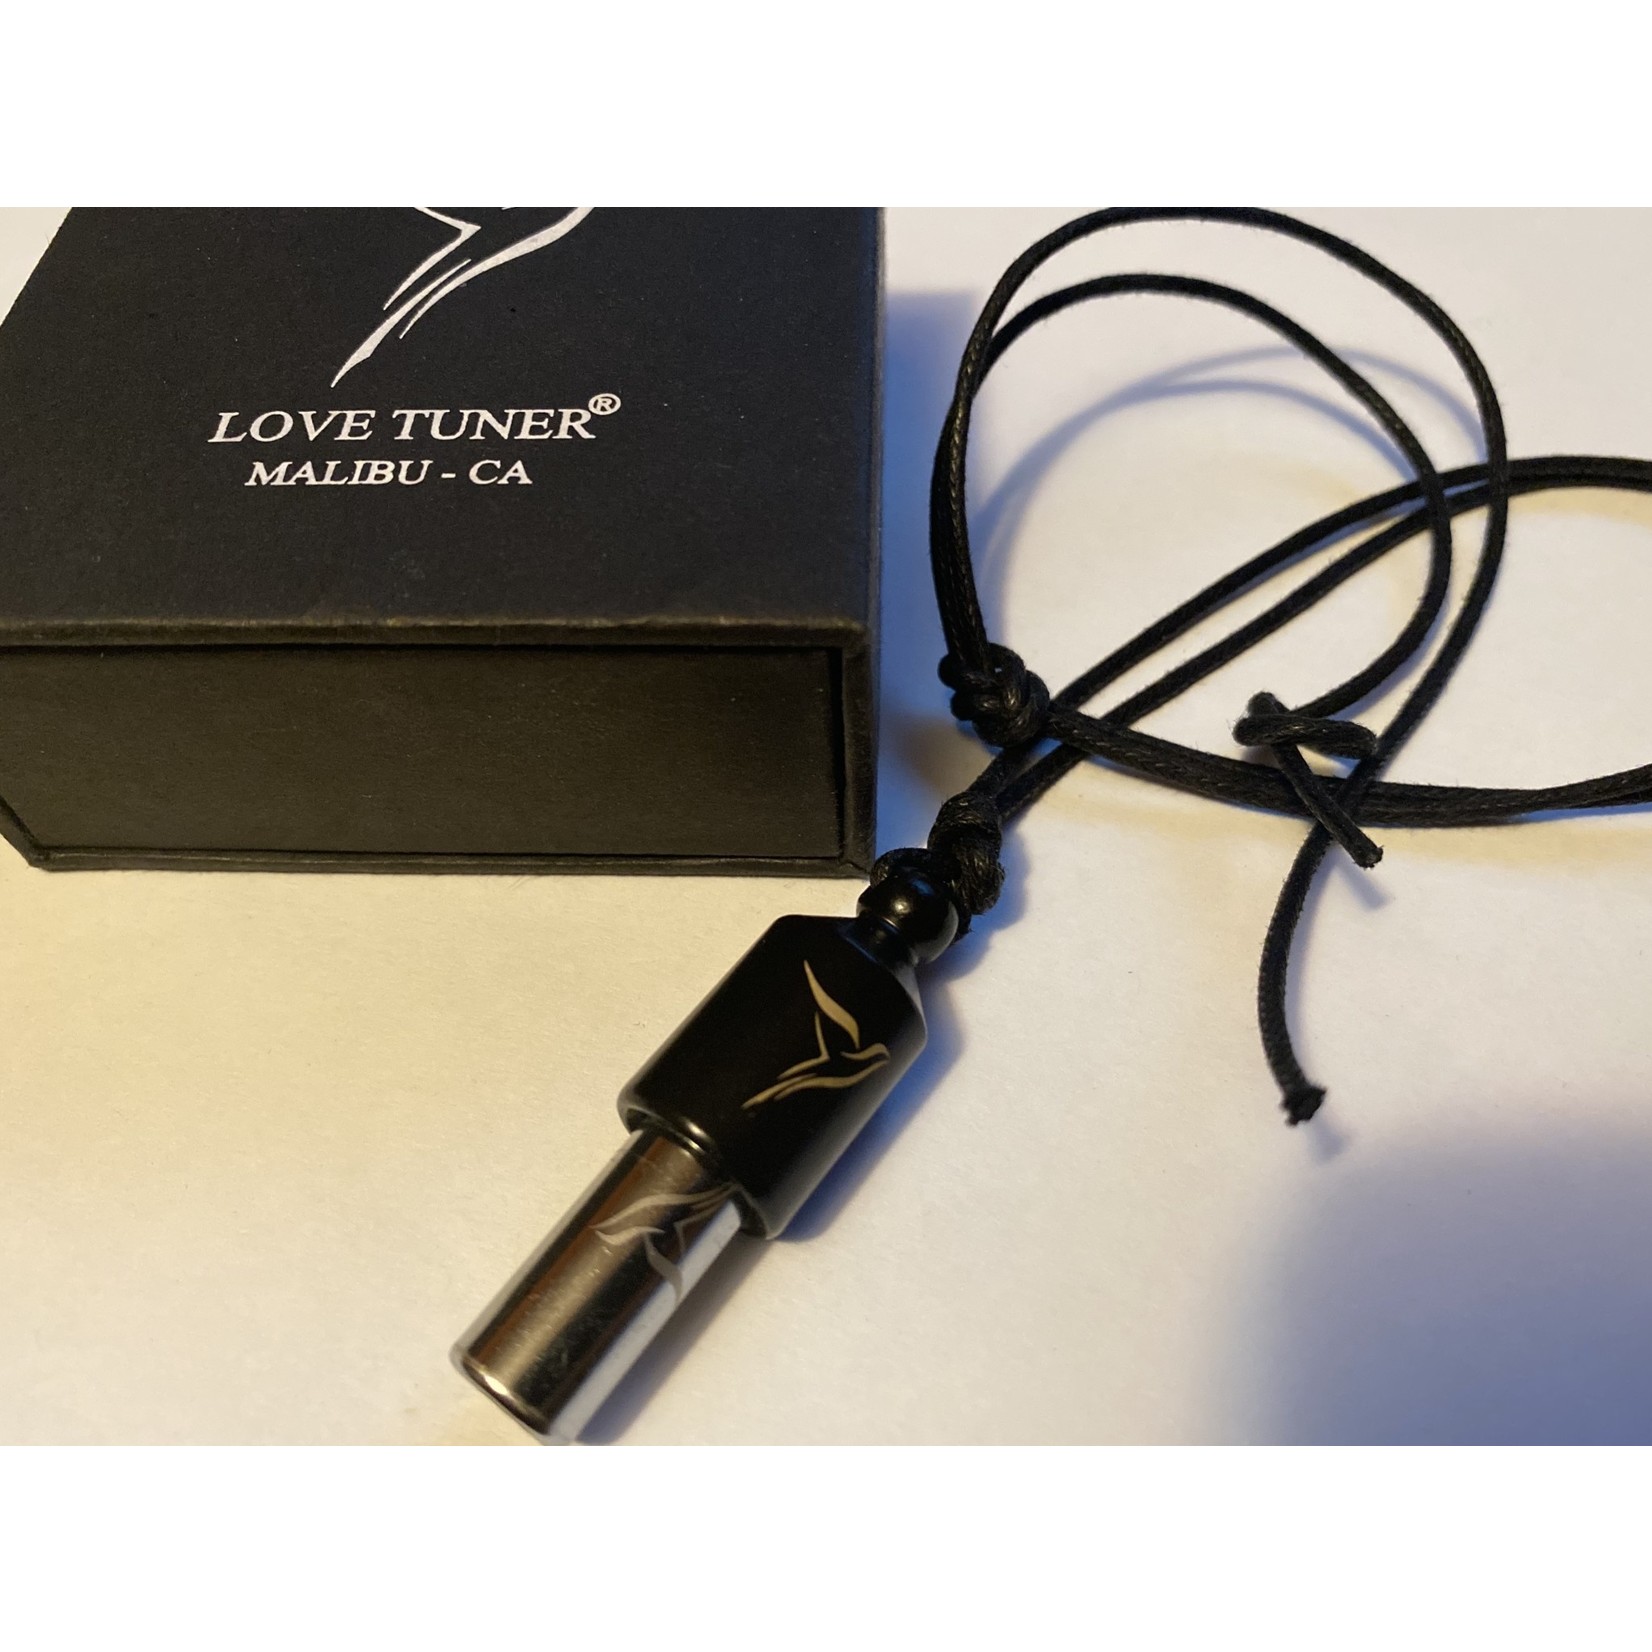 The Lovetuner is a revolutionary mindfulness tool that aligns you with the 528hz frequency, the vibration of love.